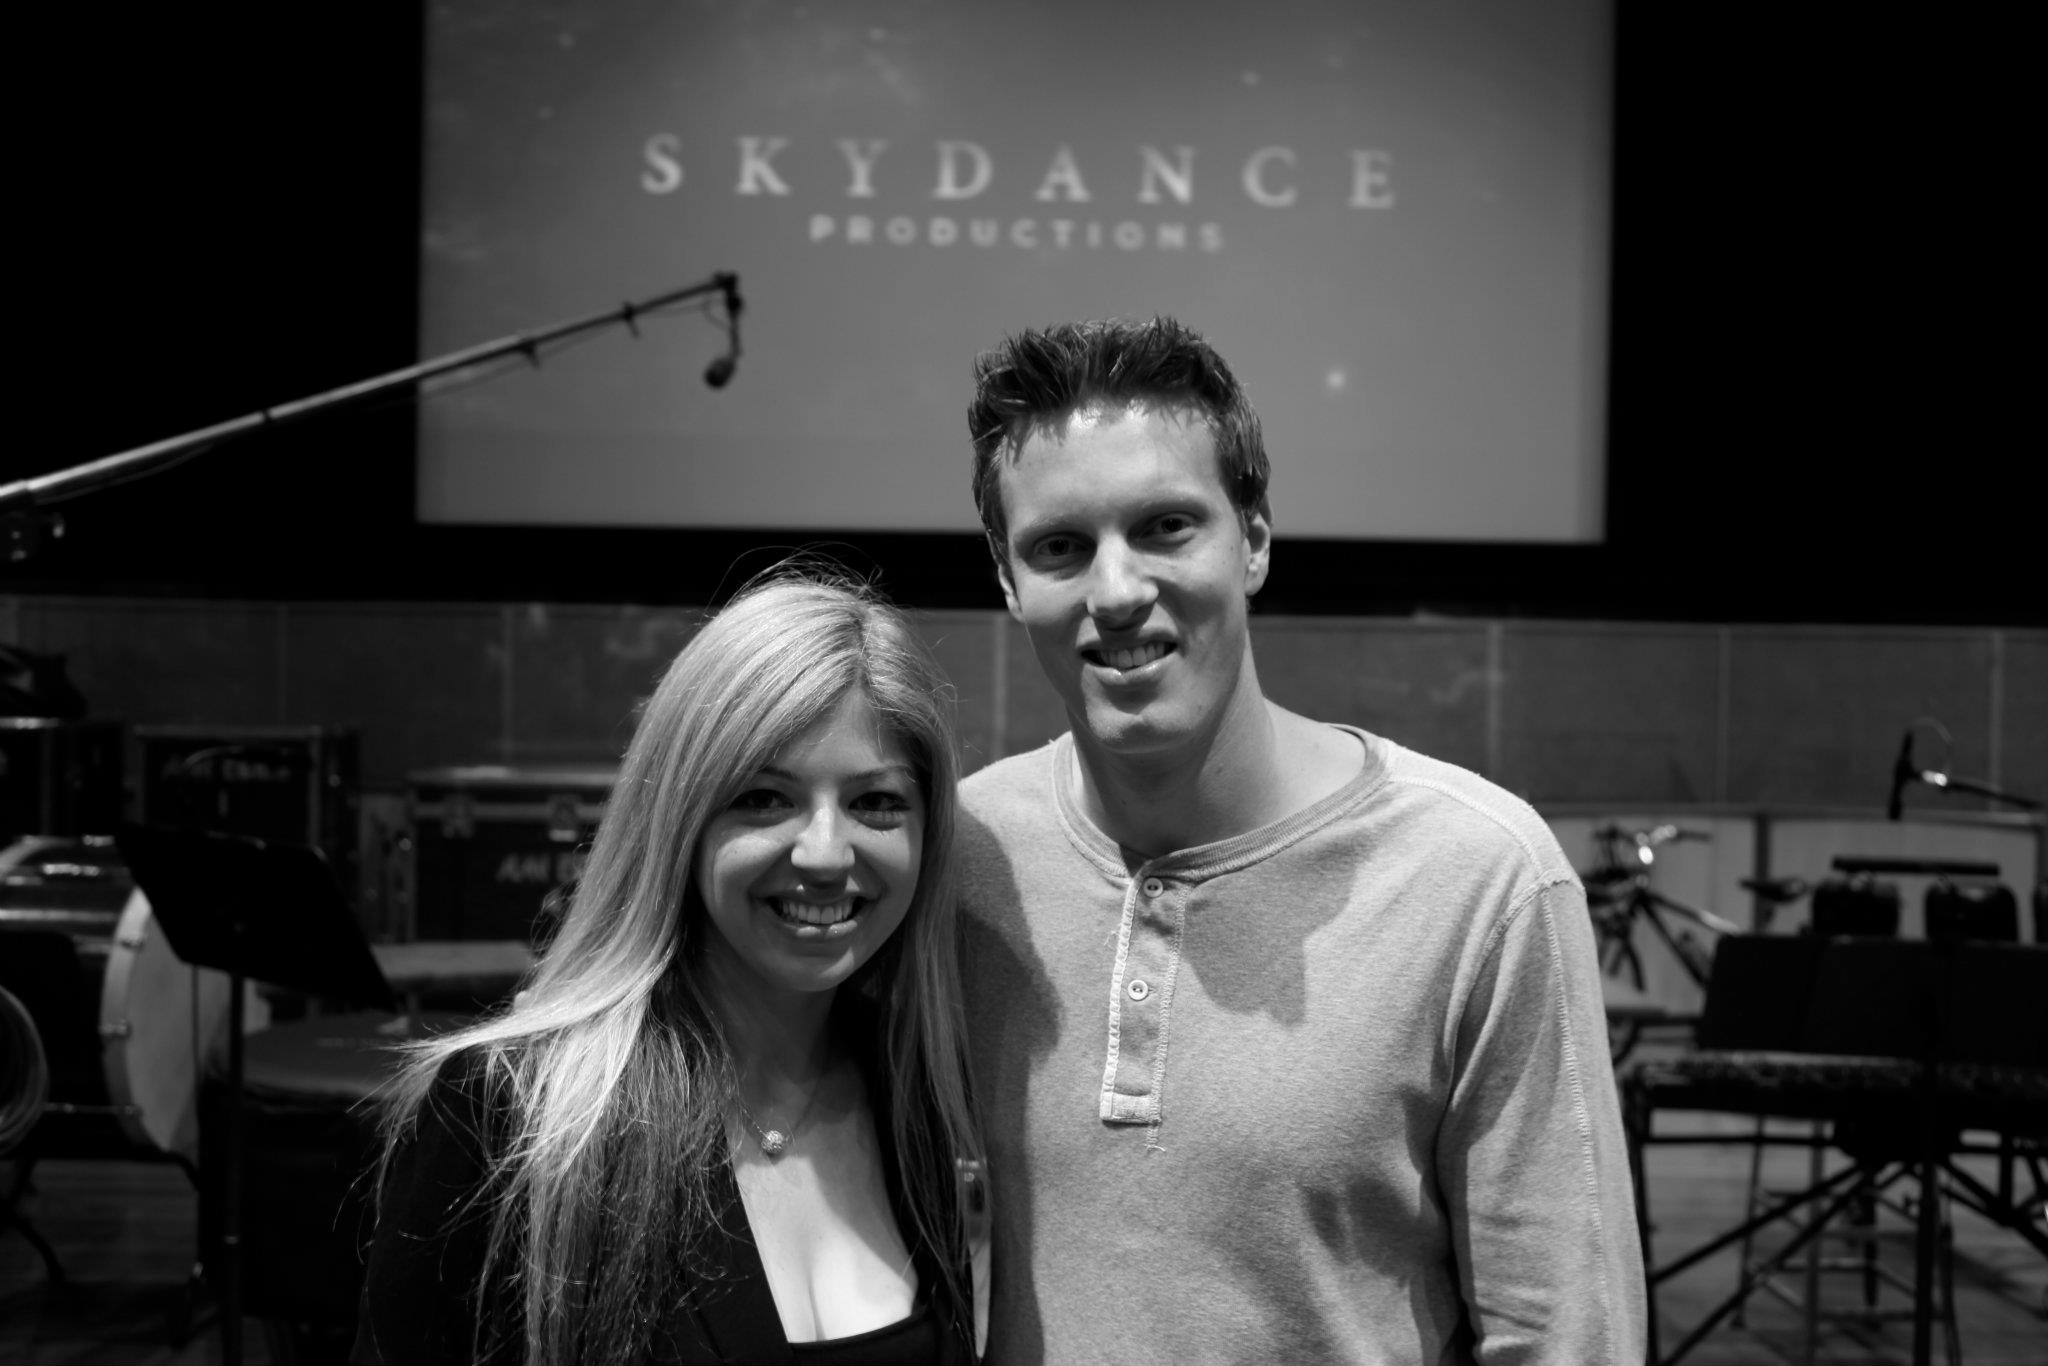 With David Ellison at the scoring session of Skydance Productions Logo - Warner Brothers Scoring Stage.